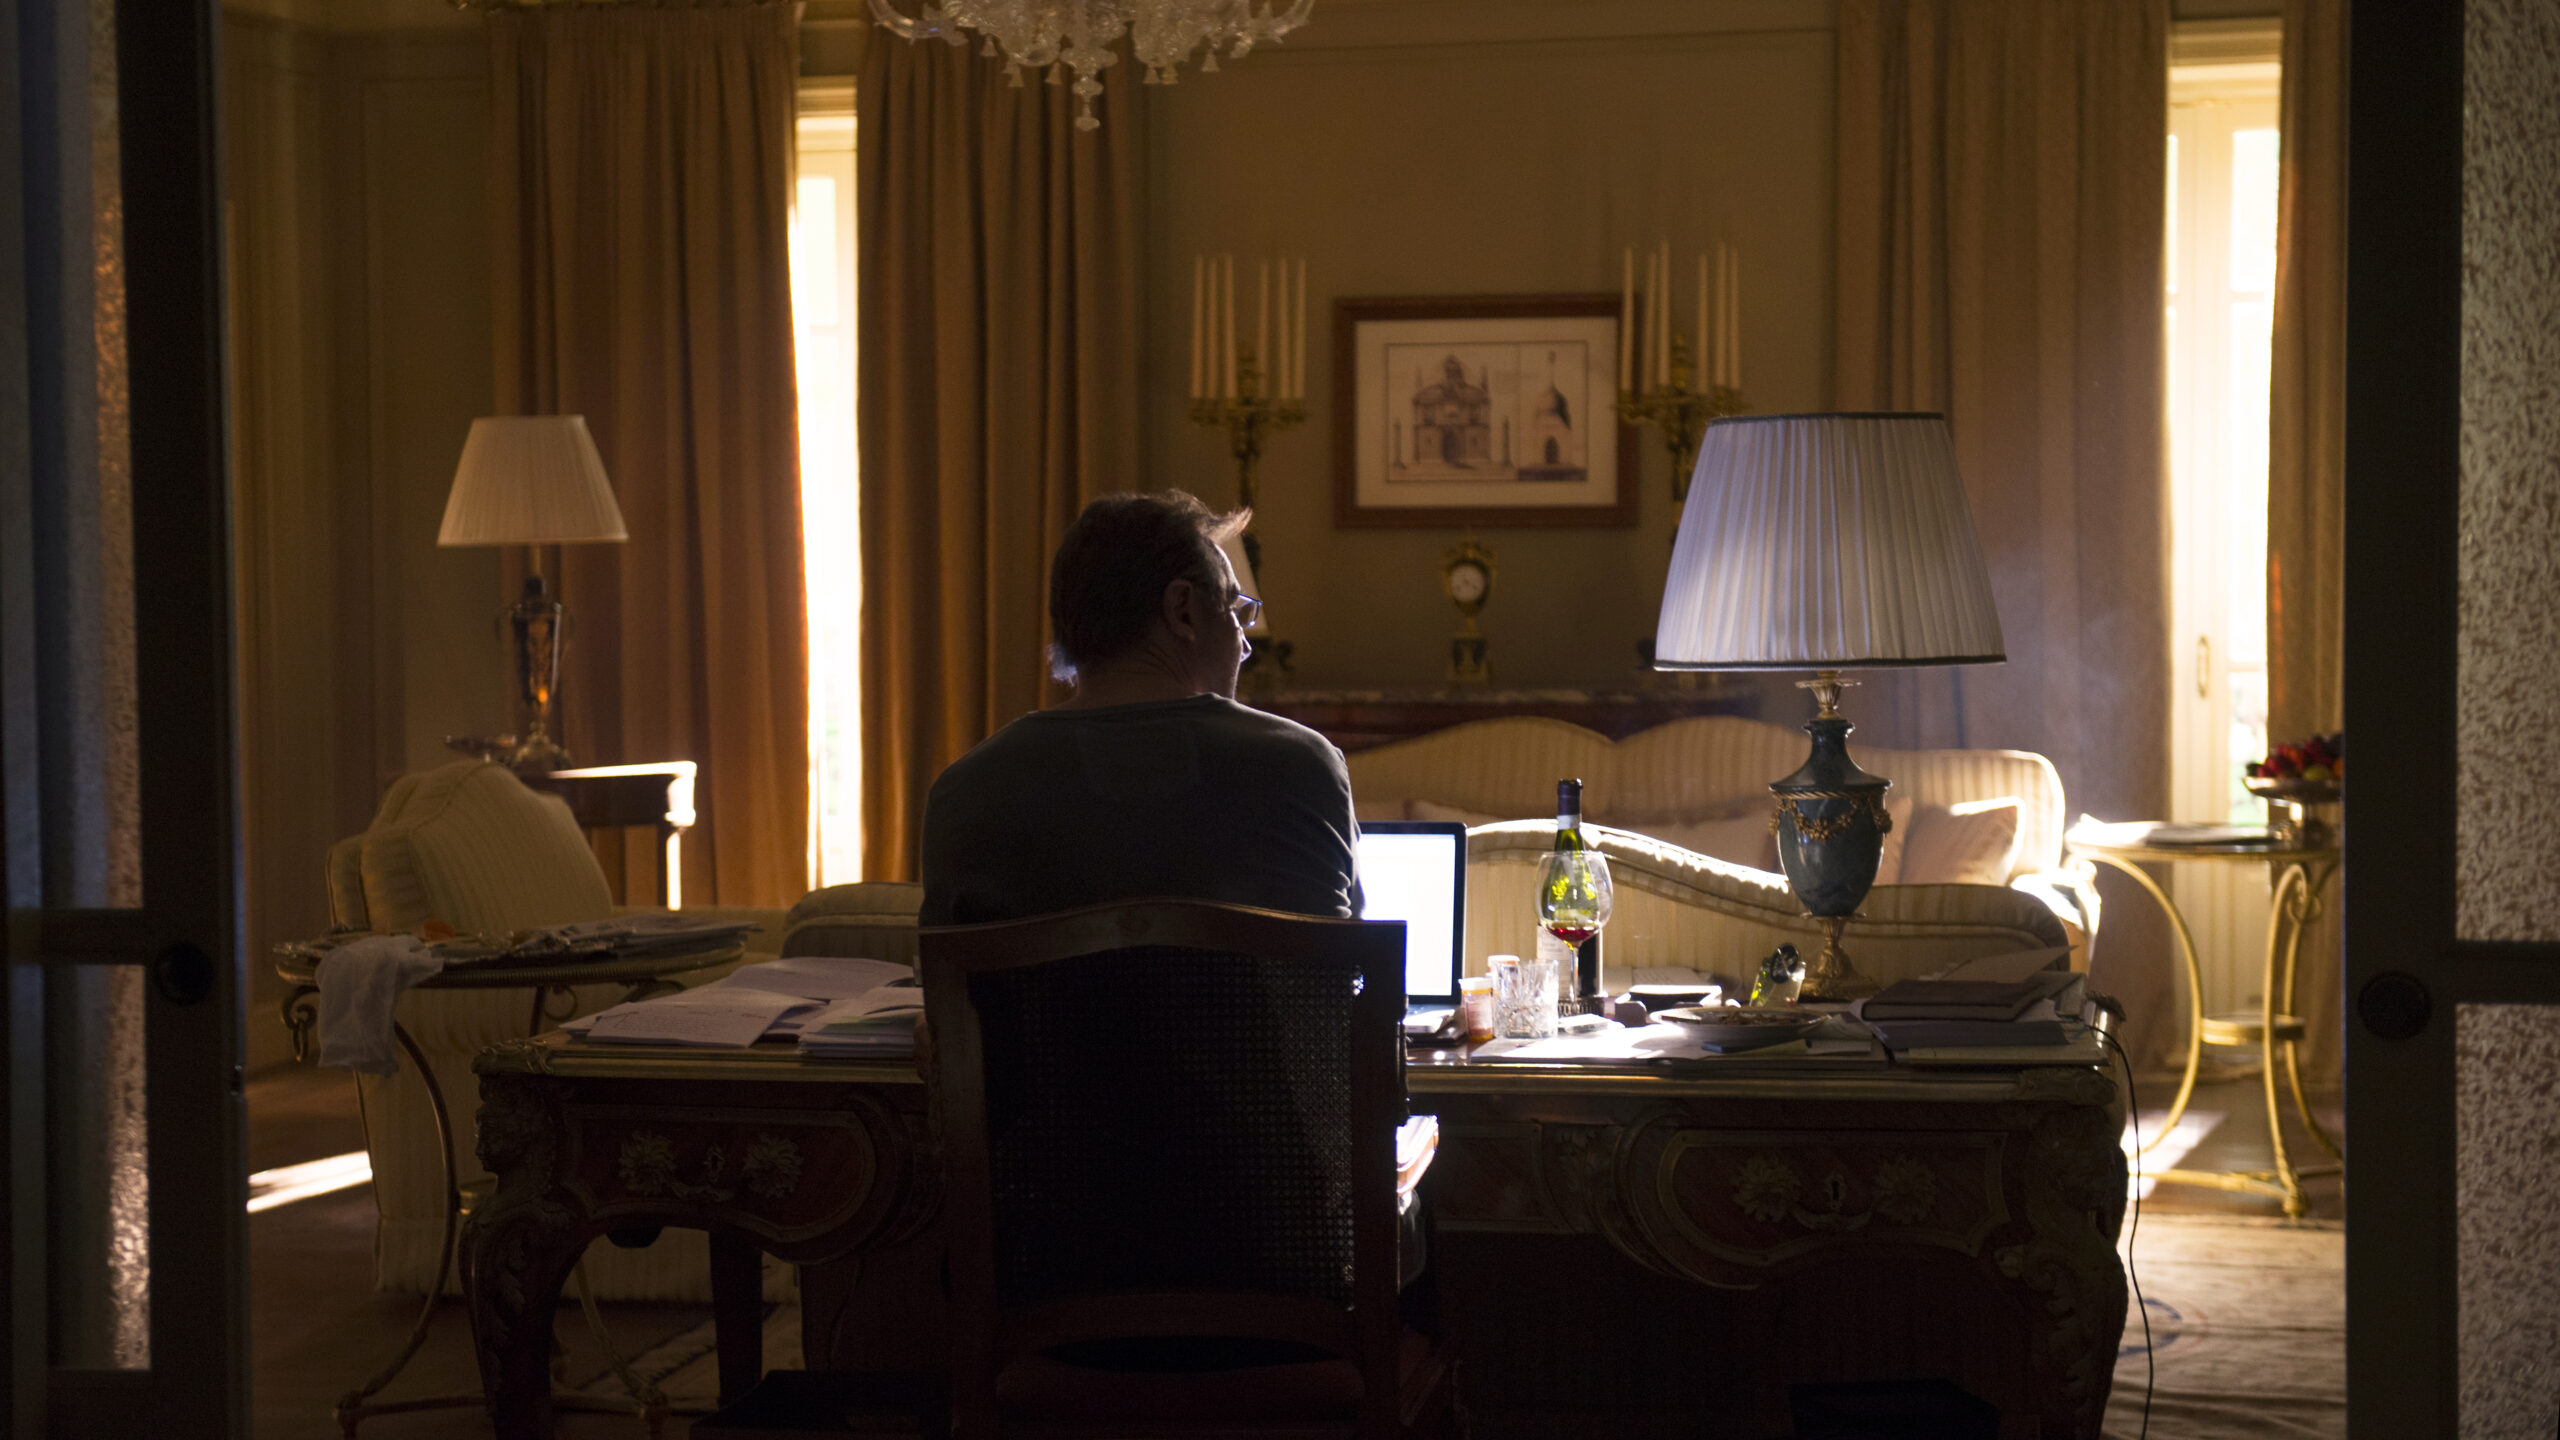 THIRD PERSON - Directed by Paul Haggis - Int. Paris Hotel Room, Stage Set - ©2013 - Corsan